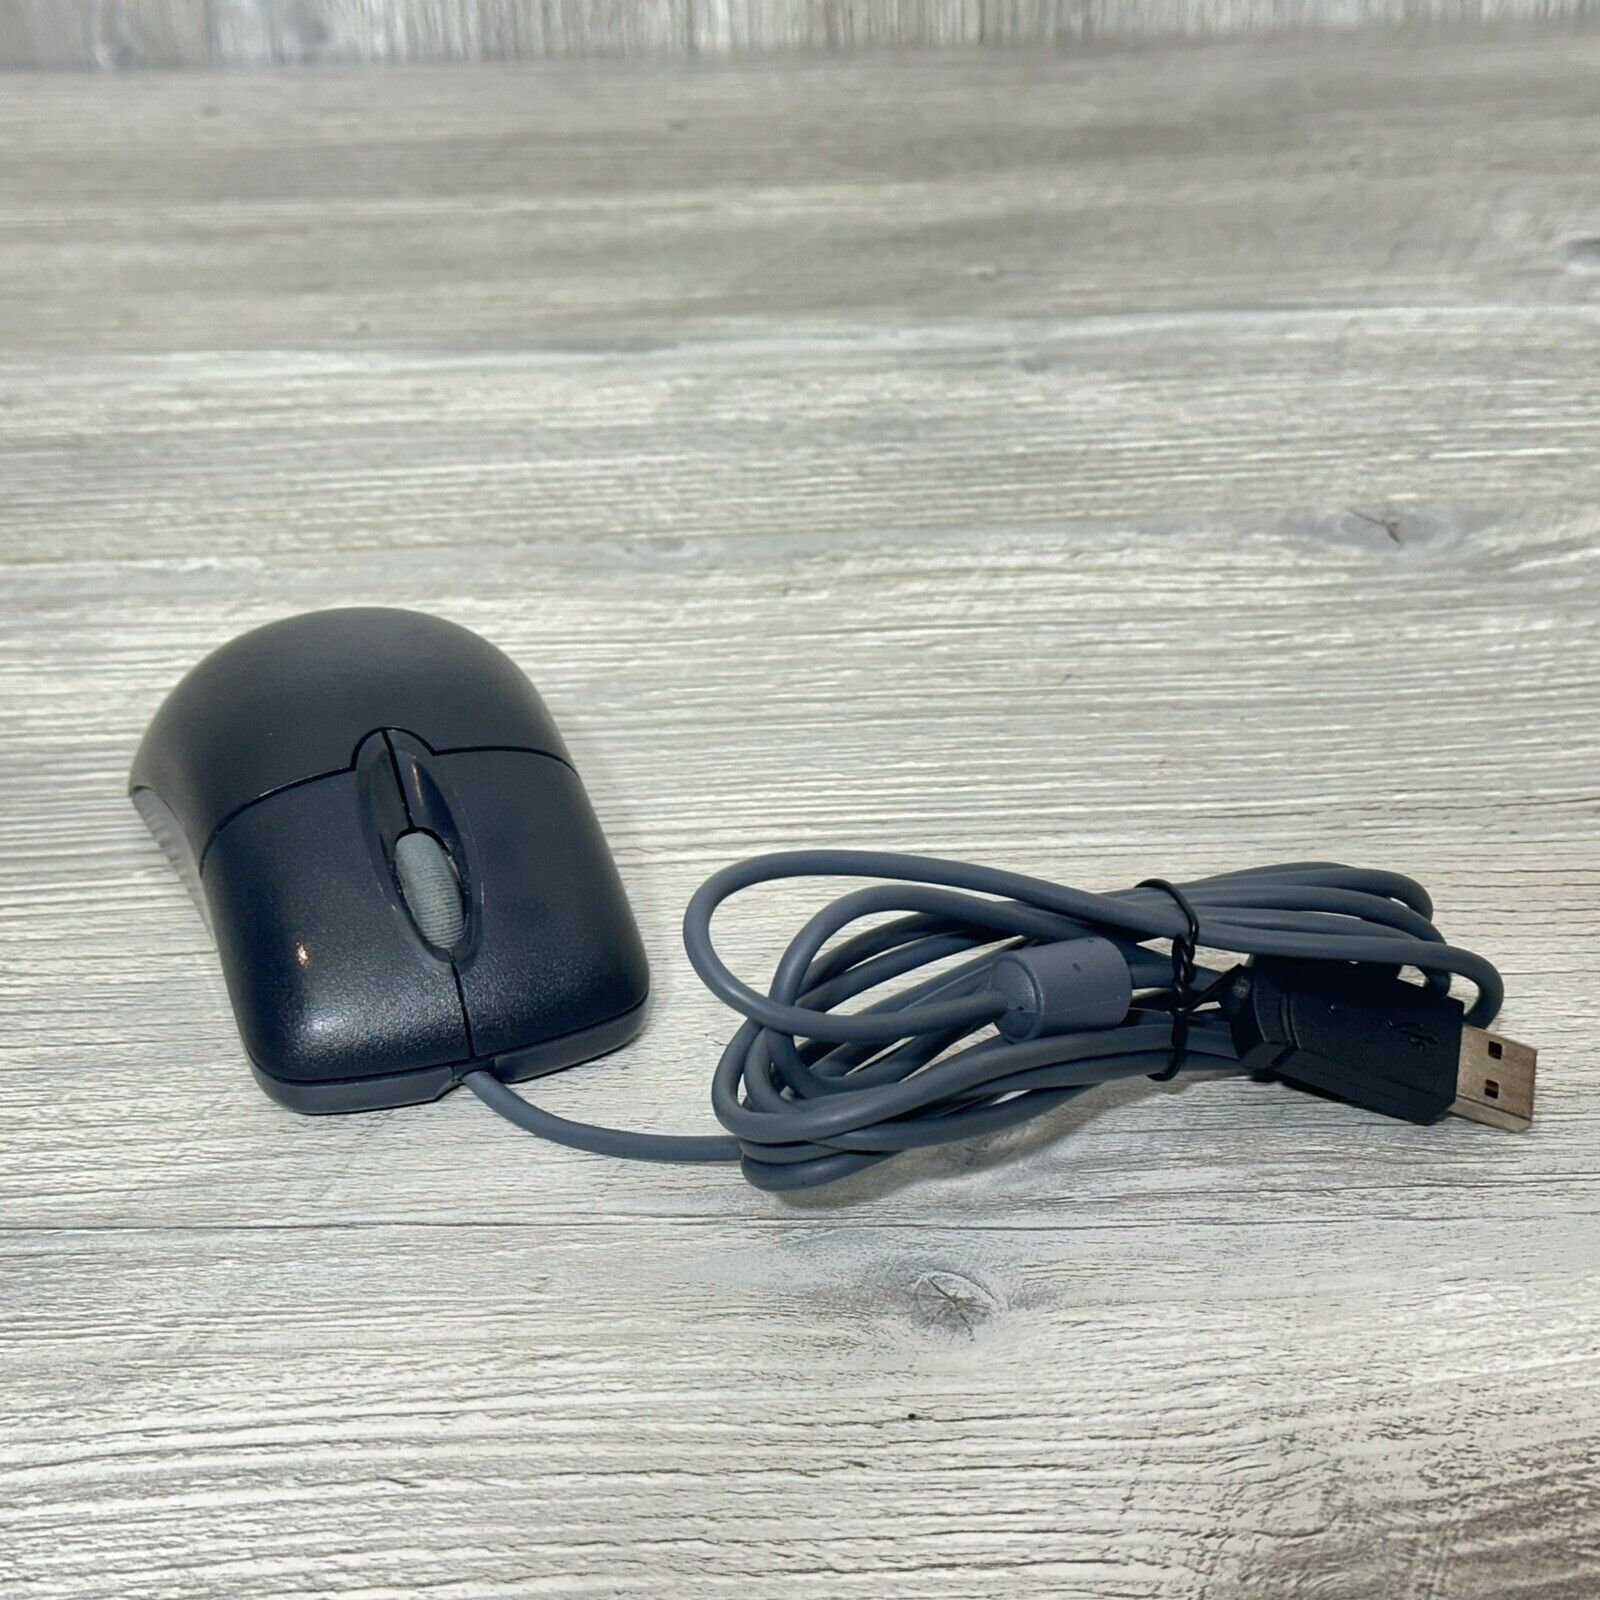 Vintage Black Microsoft Wheel Mouse Optical USB Mouse 1.1/1.1a - Clean & Tested